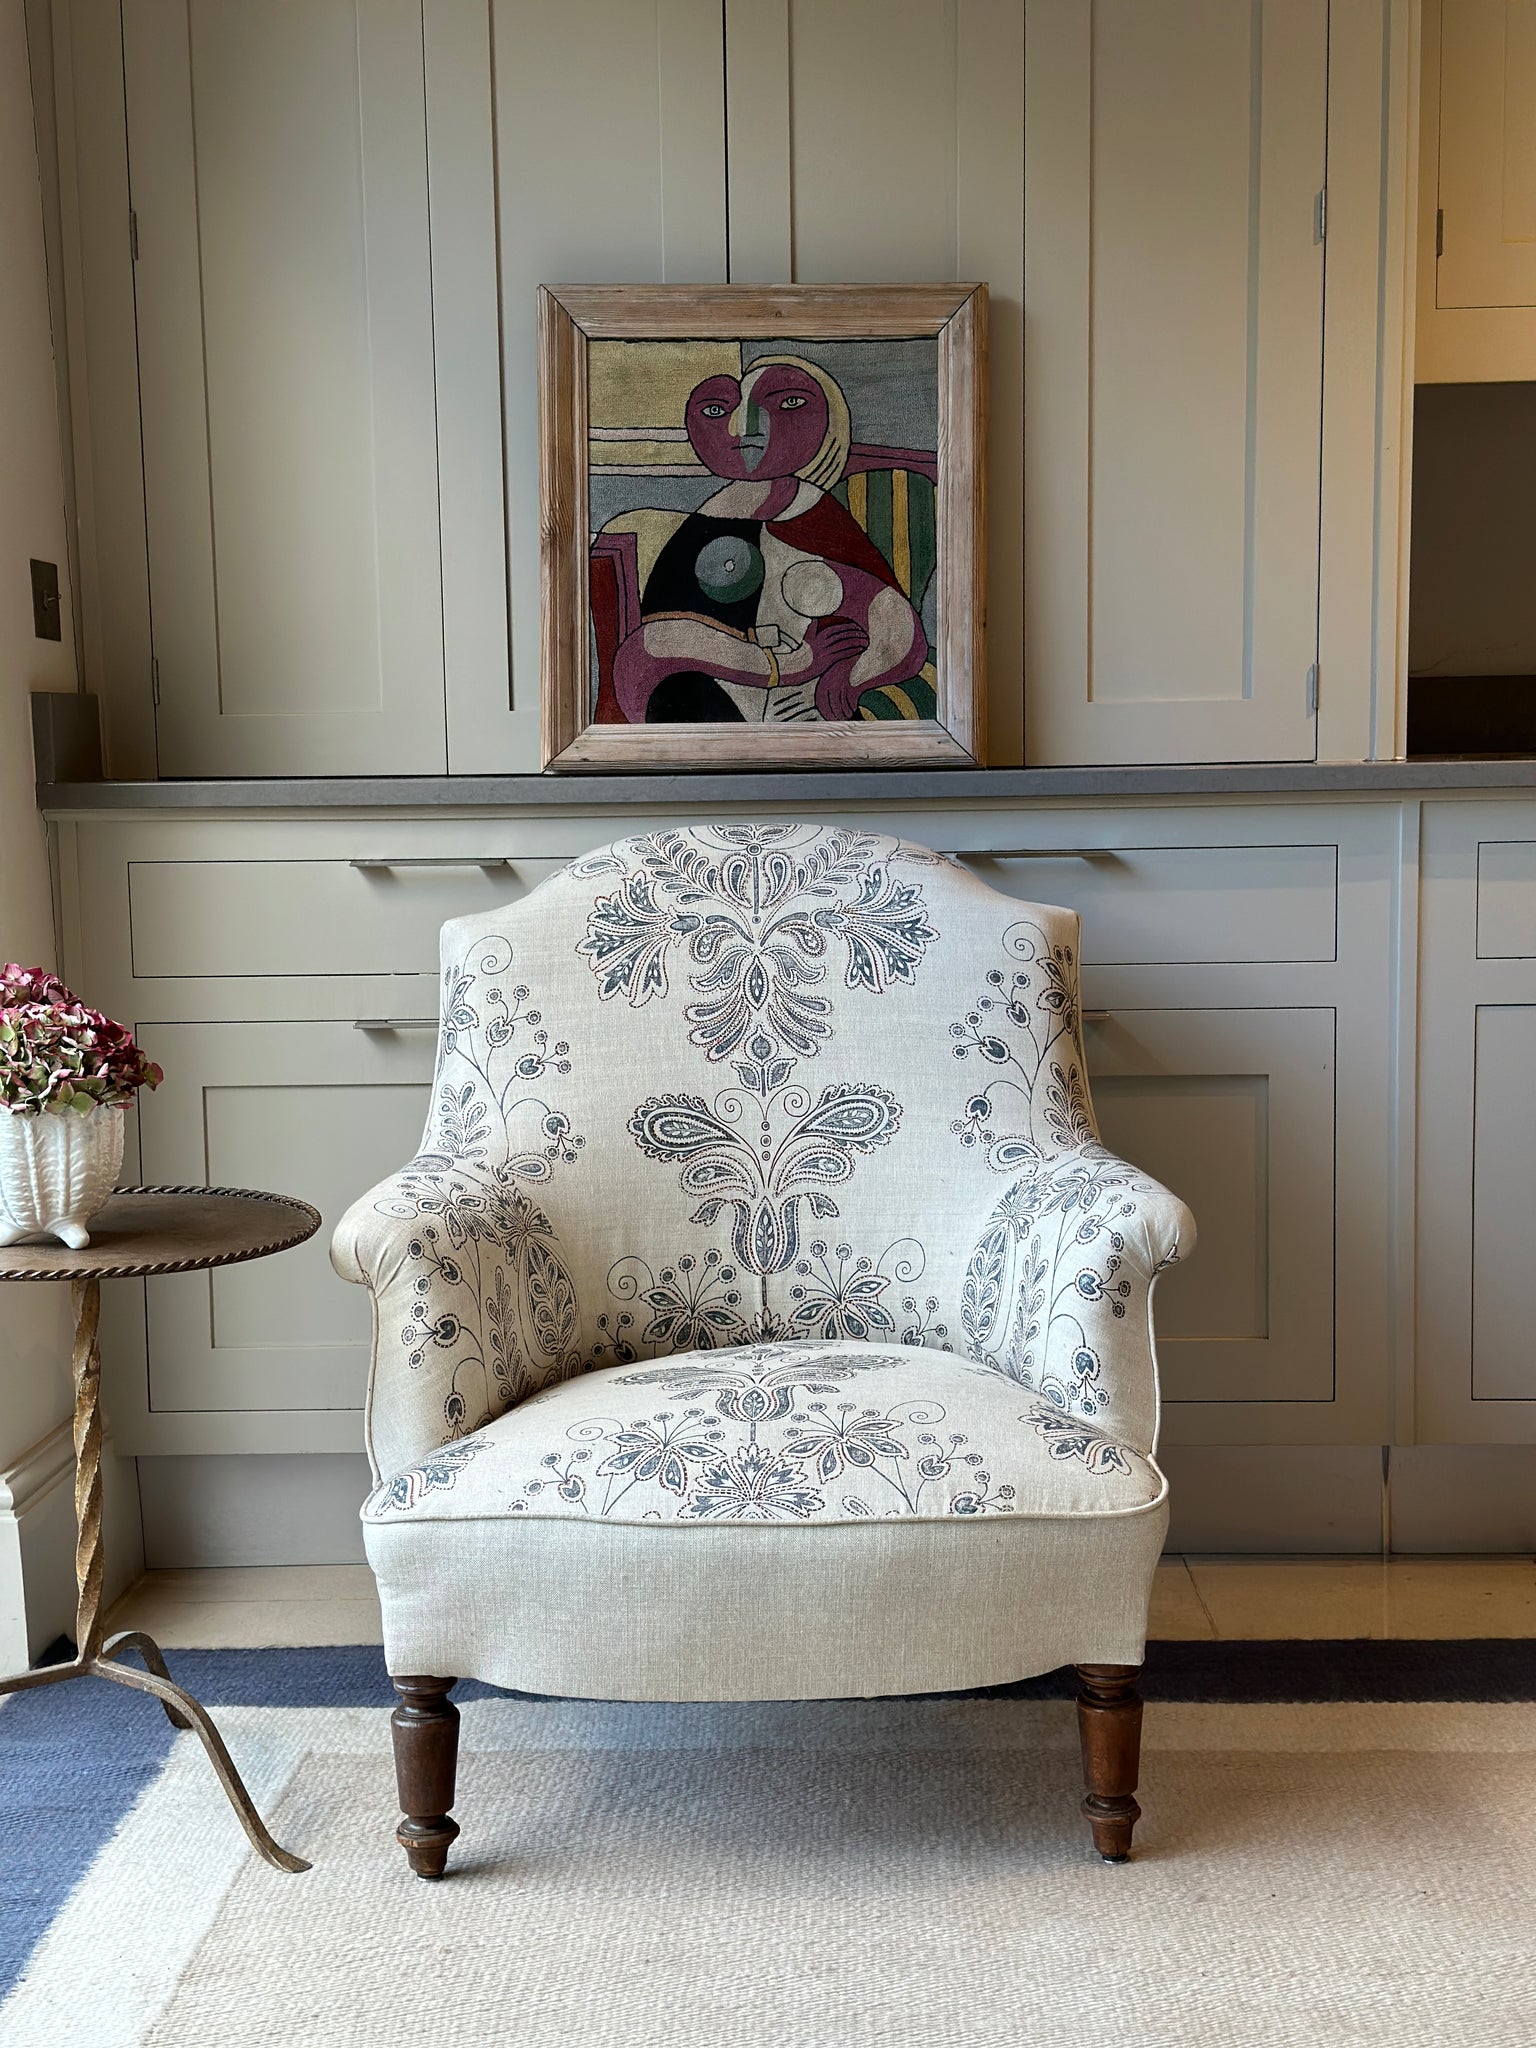 Vintage French Tub Chair in Guy Goodfellow Remy Indigo